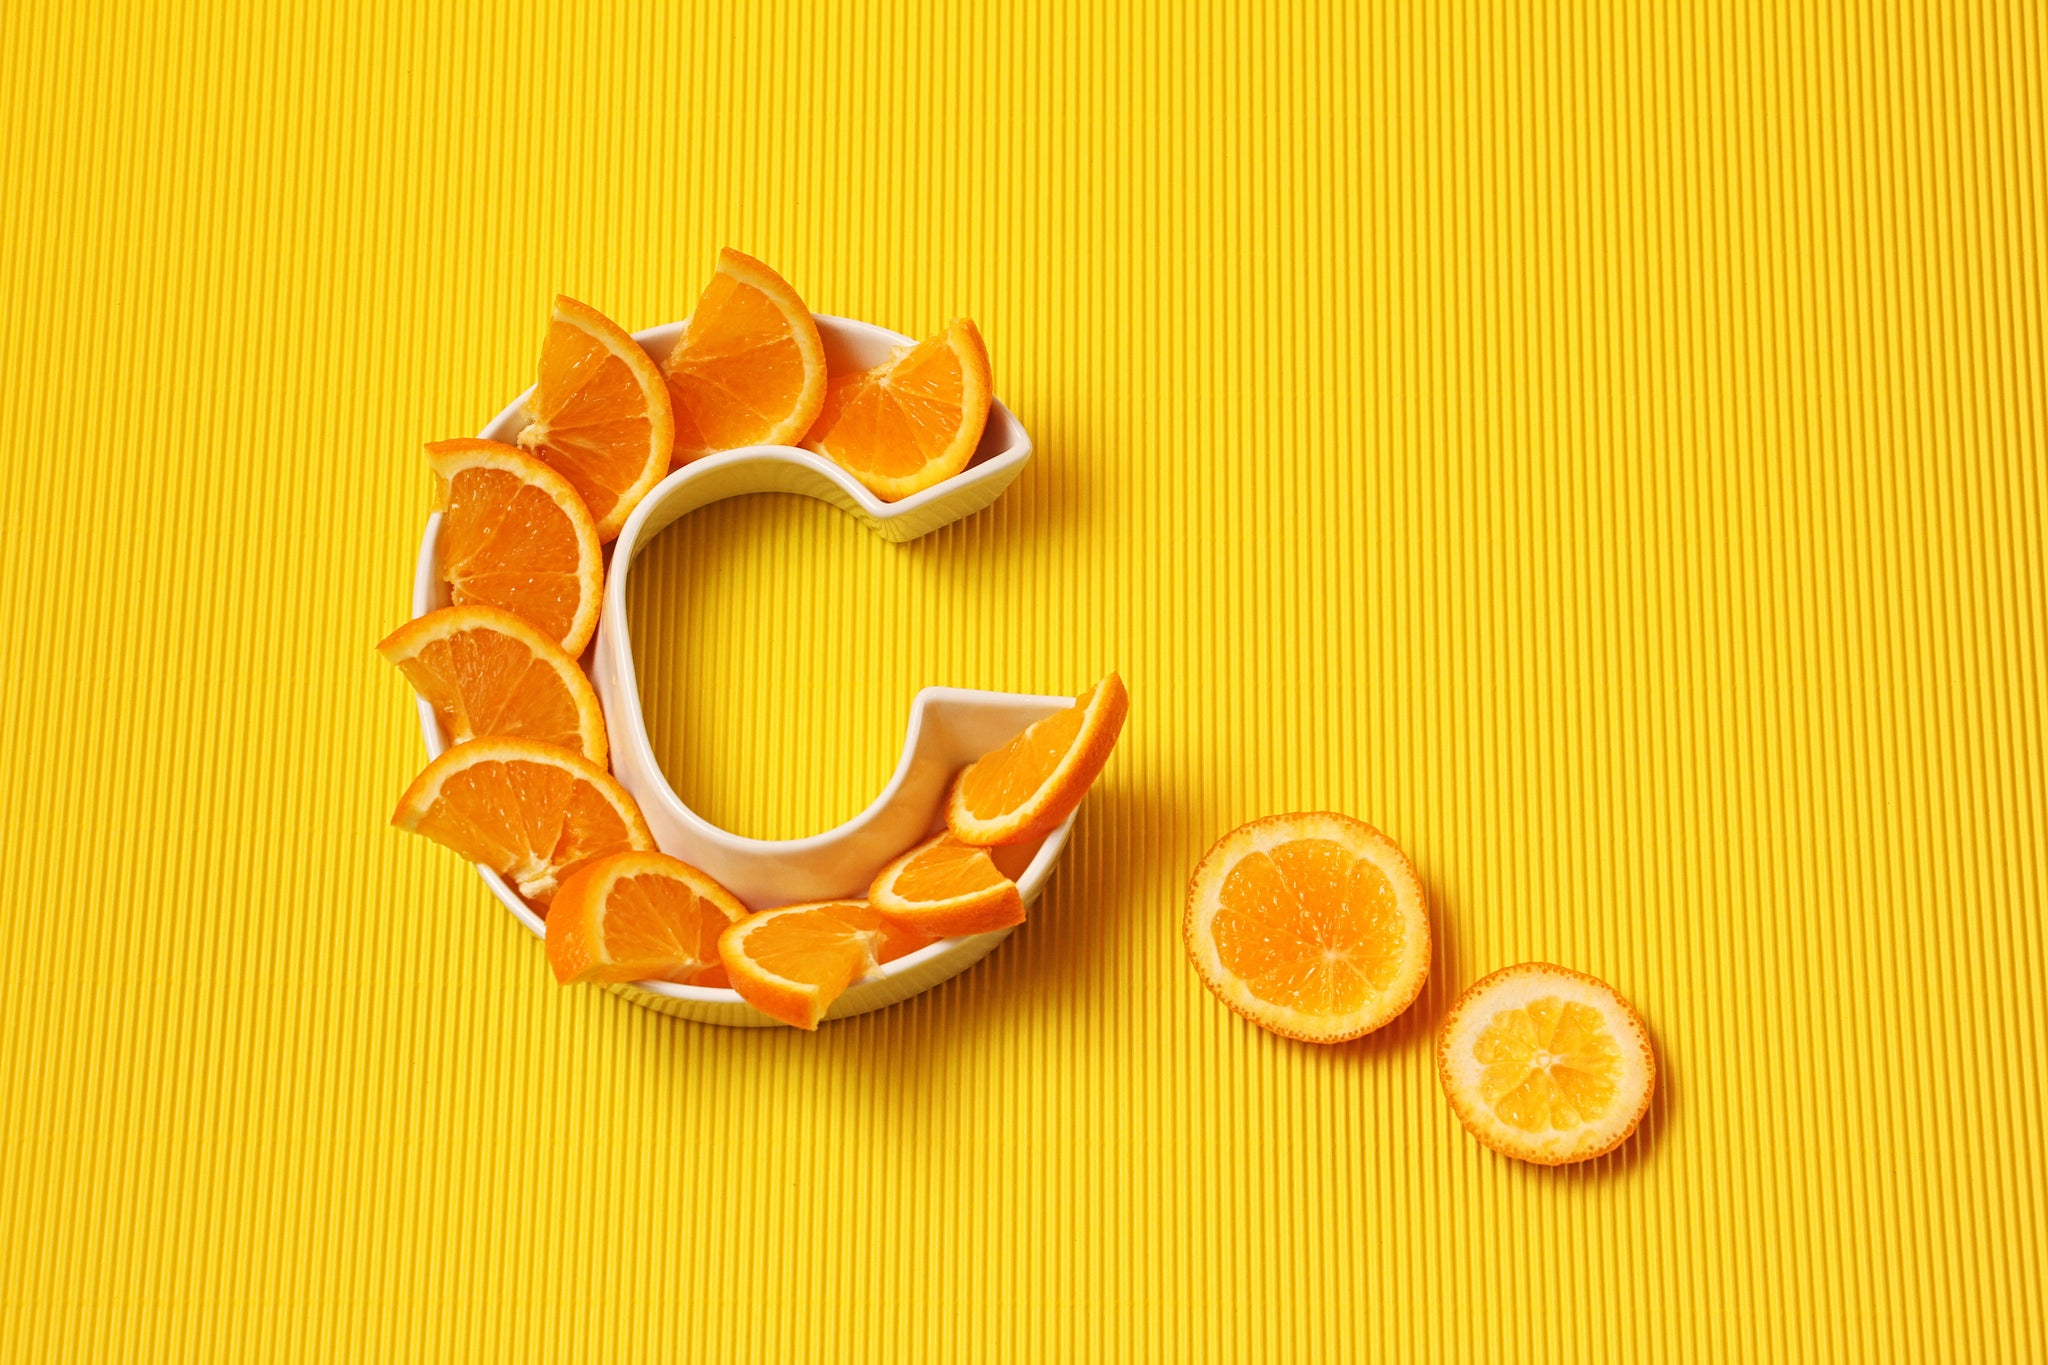 Vitamin C is a known immune booster with a wide range of proven health benefits, including collagen production in the skin.